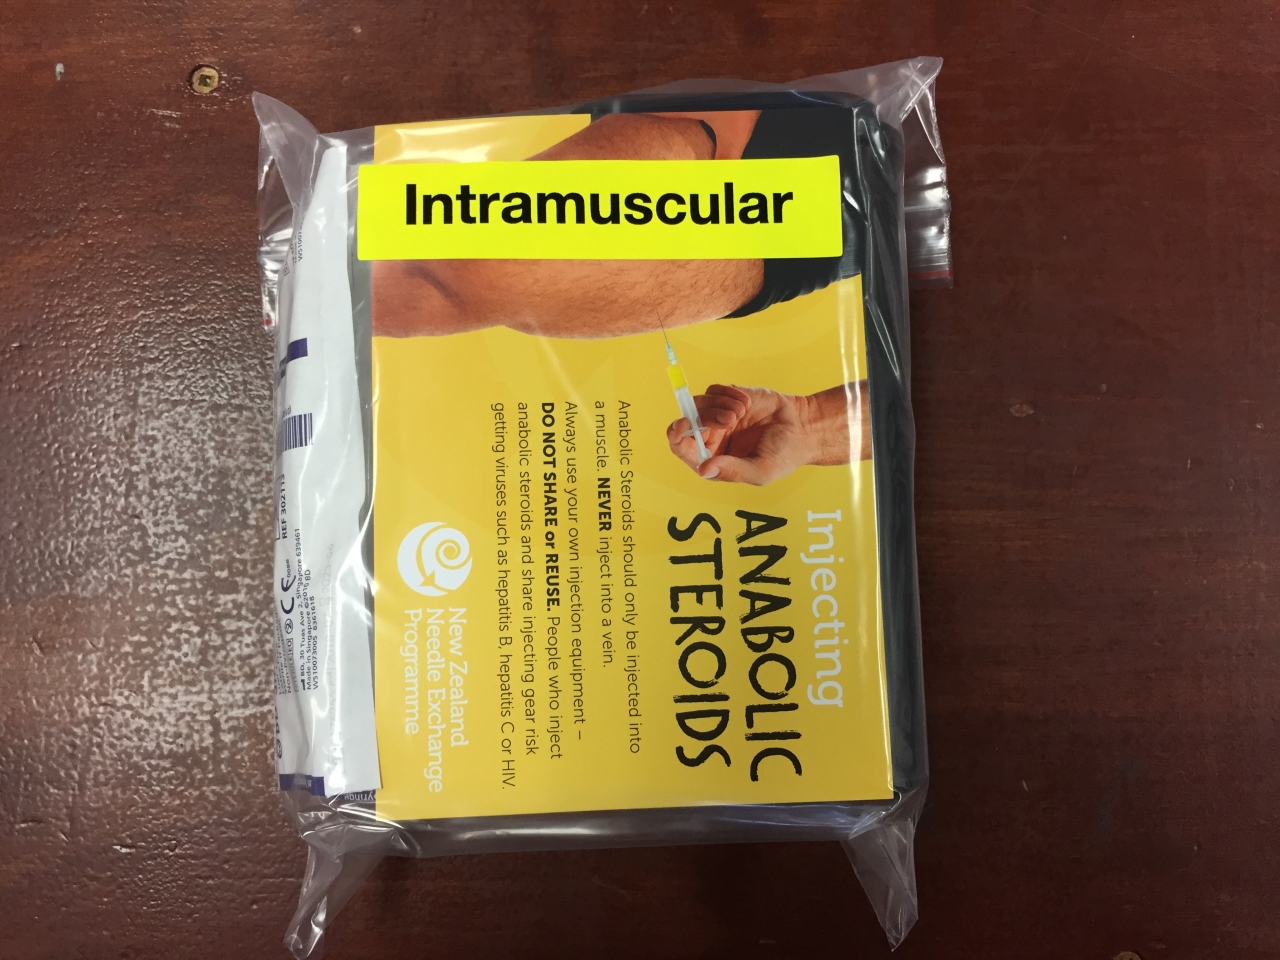 10 Pack Intramuscular - Please check pack contents